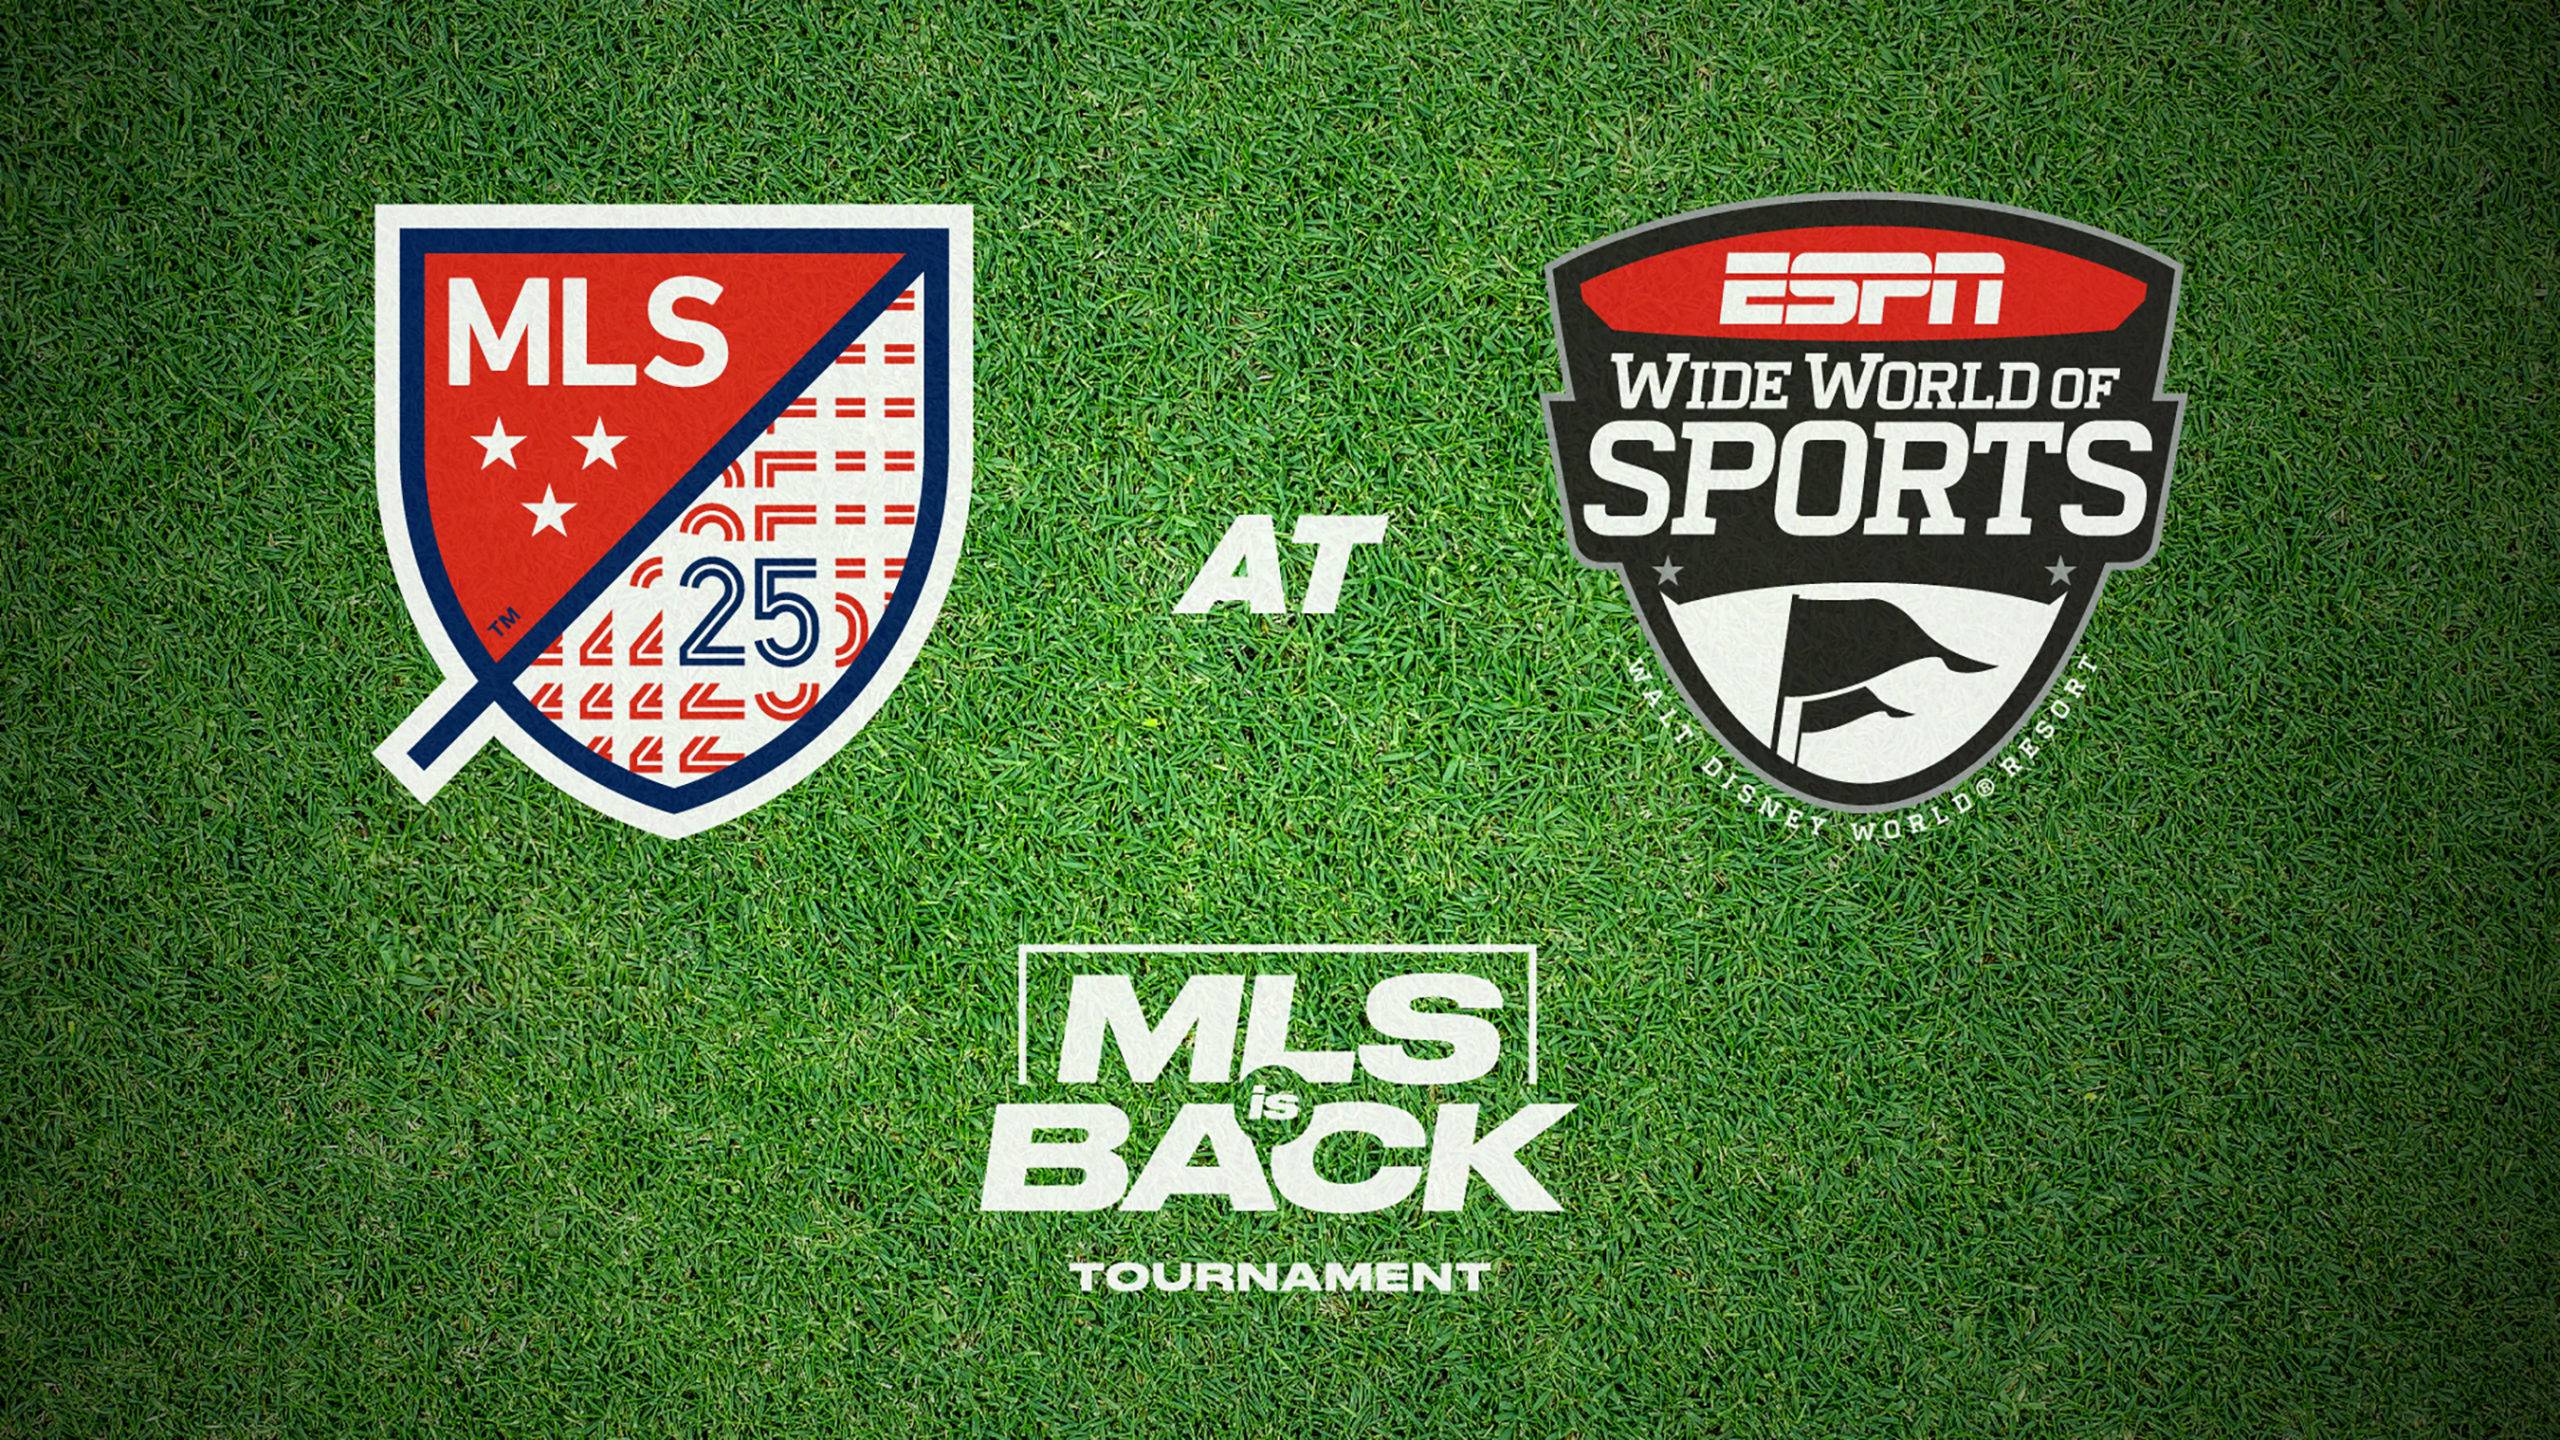 Major League Soccer confirmed to resume season at ESPN Wide World of Sports Complex and the Walt Disney World Swan and Dolphin